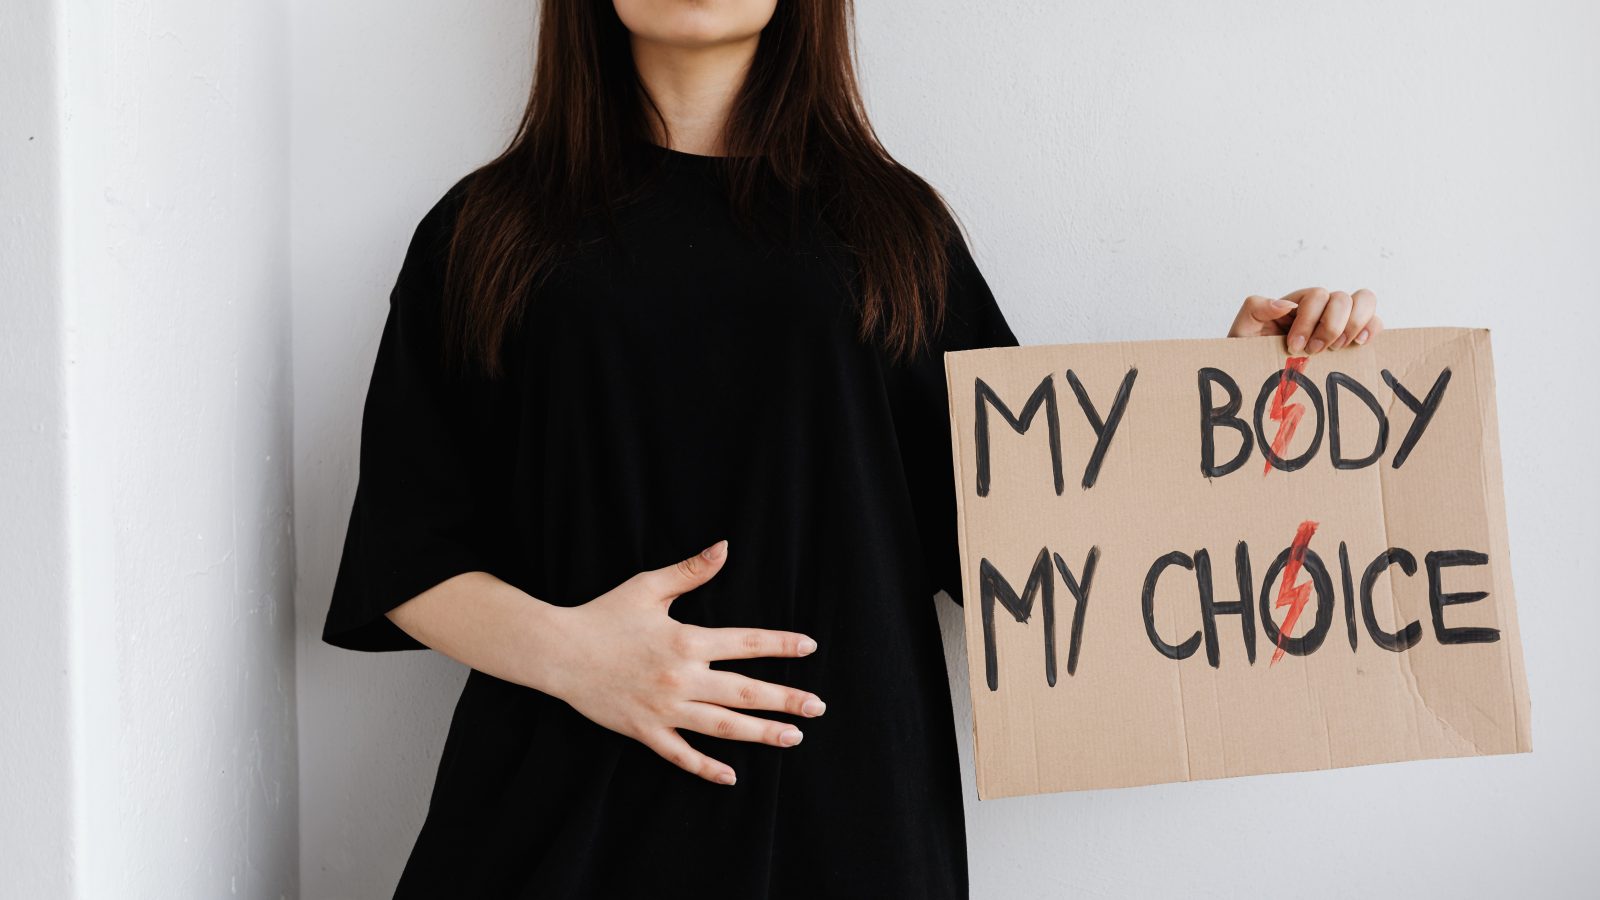 woman holds sign that says "my body, my choice"